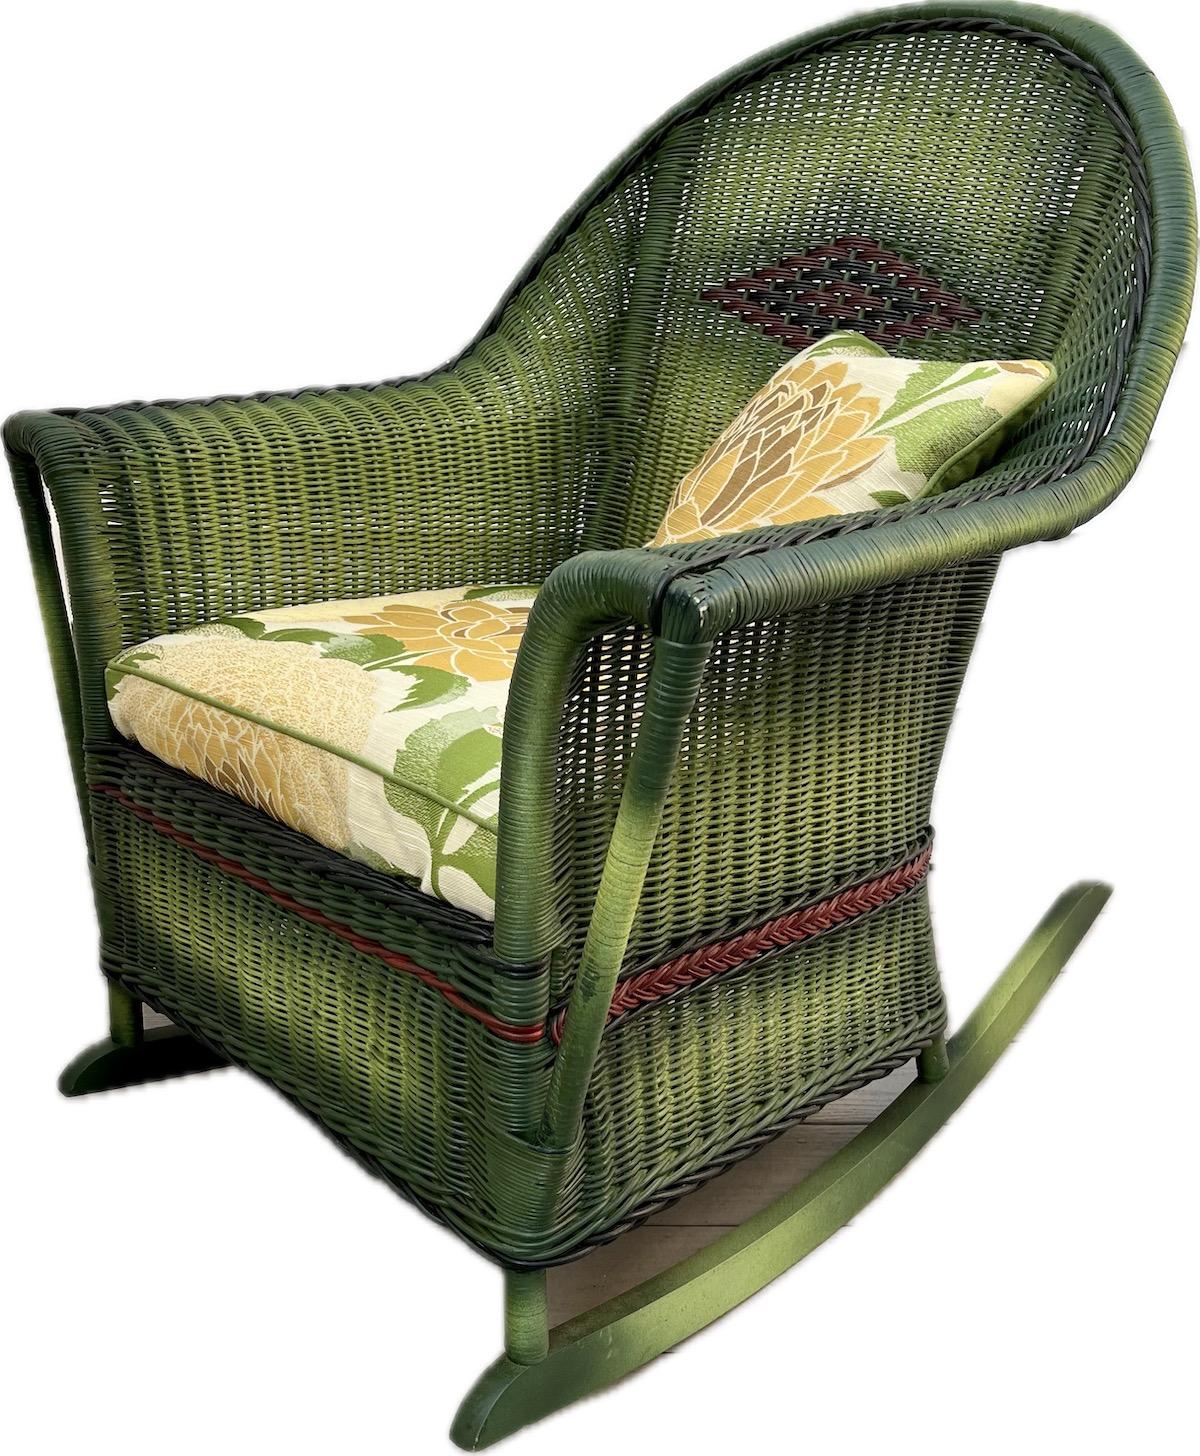 A beautiful close woven wicker rocking chair beautifully woven and decorated from all sides as pictured in a French green finish with black and red accent trim. This American made, C. 1920 rocker is attributed to The Heywood Wakefield Company,